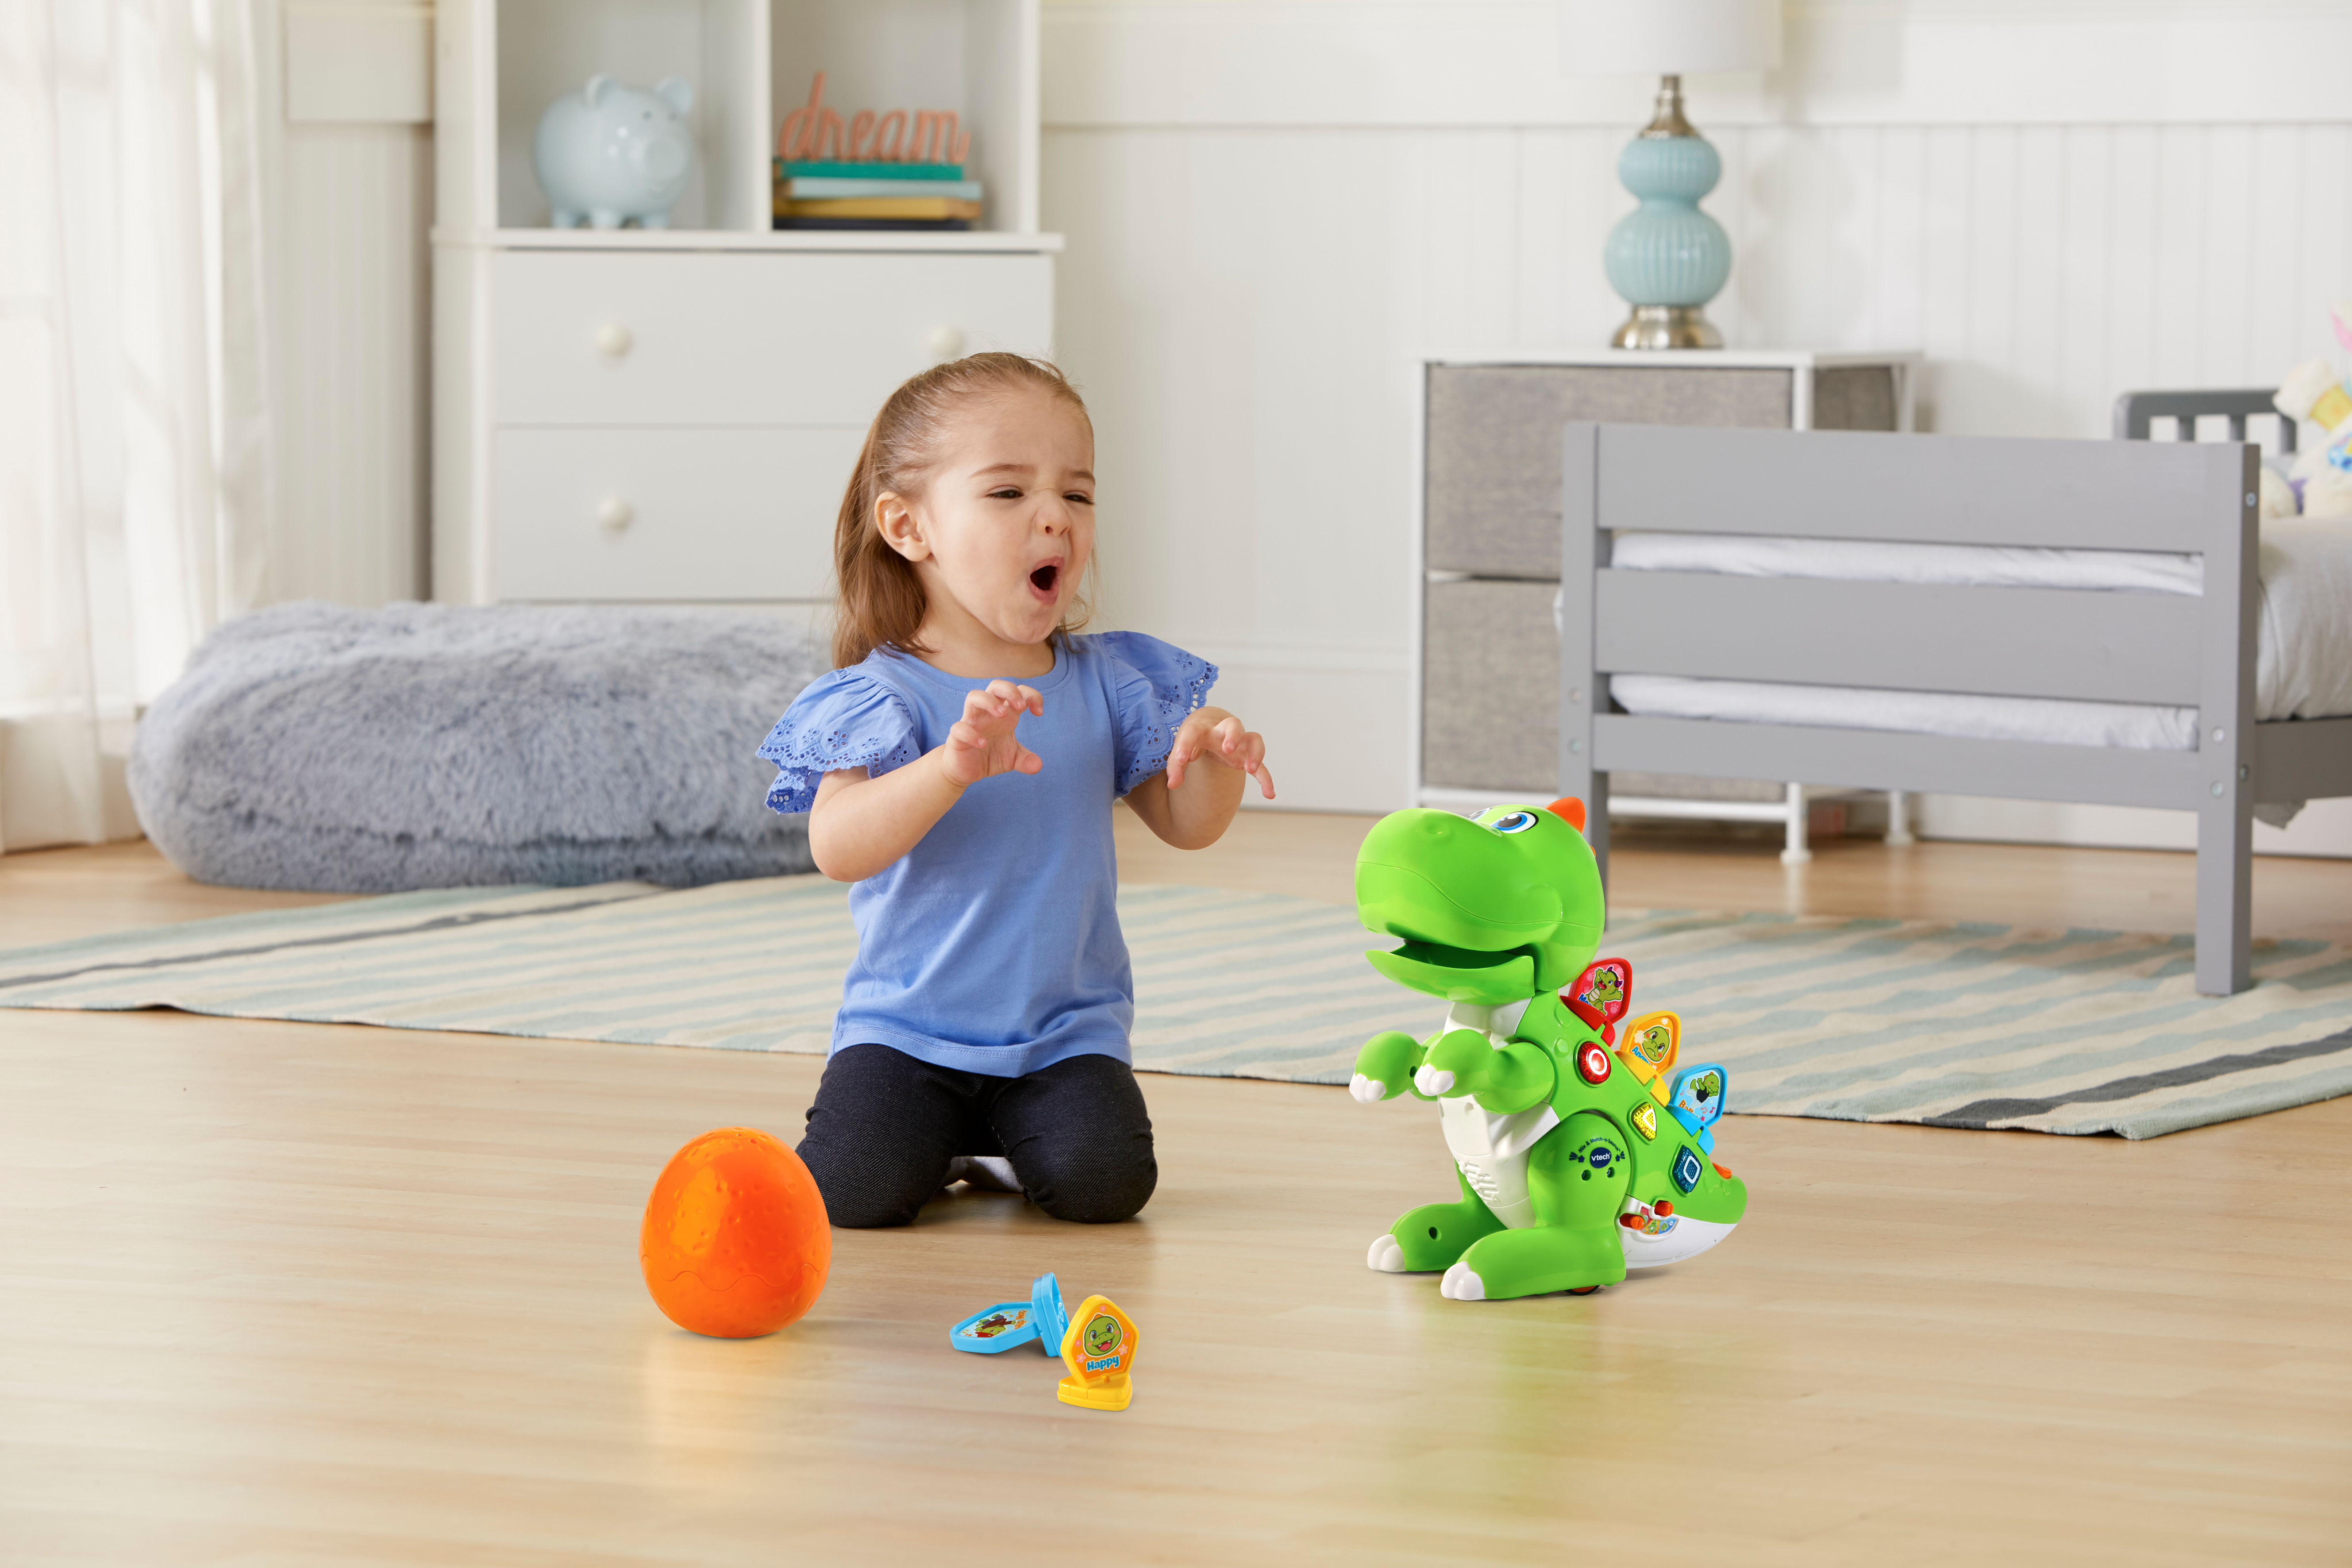 VTech Mix and Match-a-Saurus, Dinosaur Learning Toy for Kids, Green - image 4 of 10